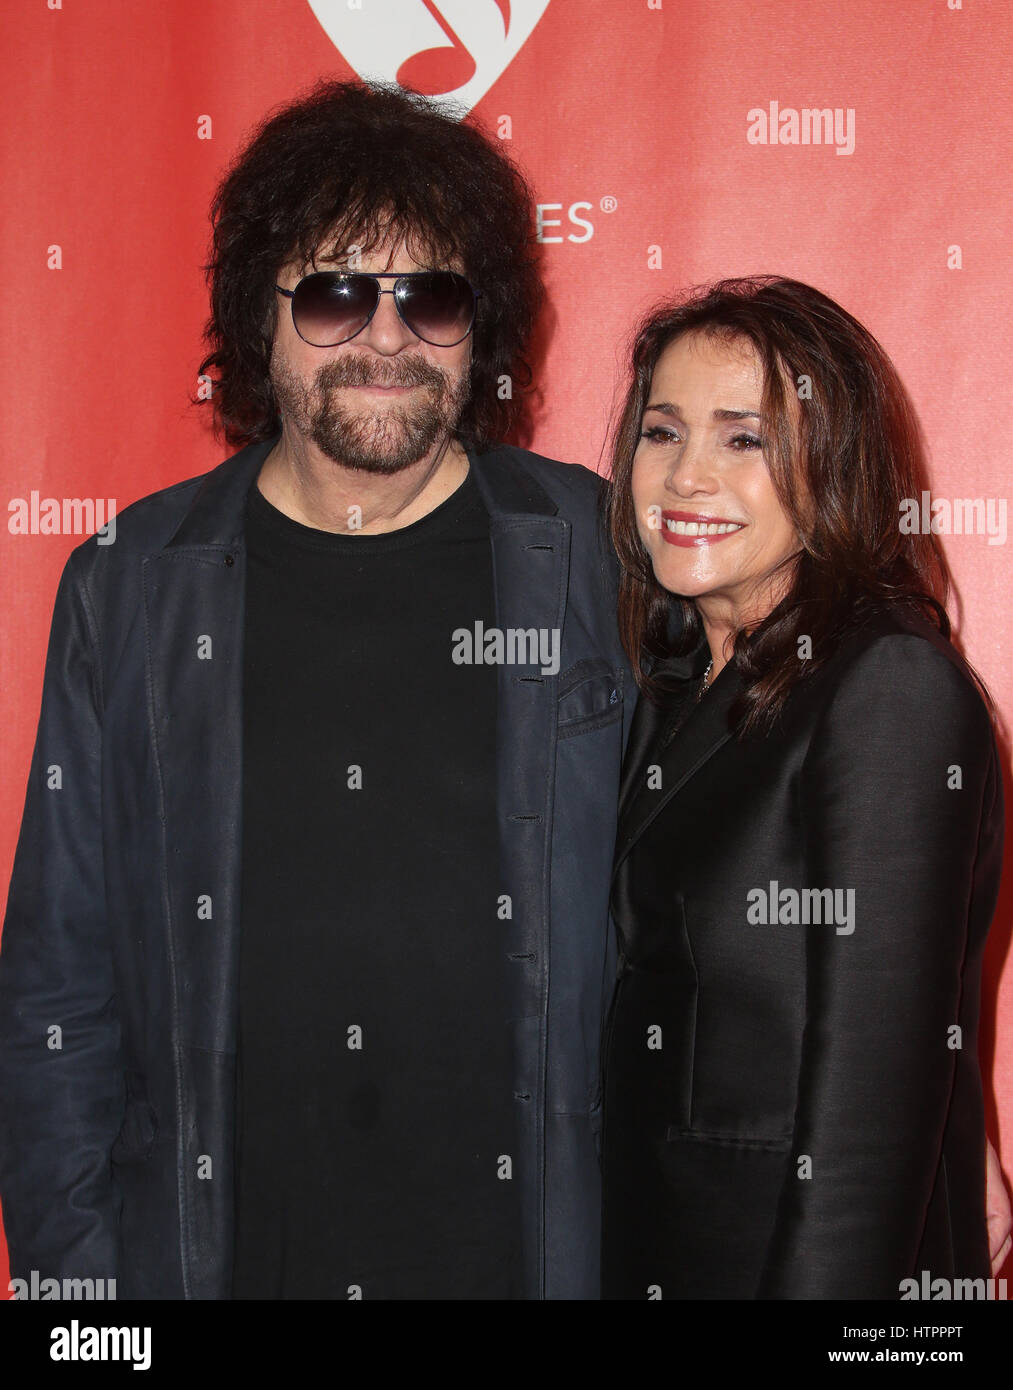 59th GRAMMY Awards - MusiCares Person of the Year Honoring Tom Petty - Arrivals  Featuring: Jeff Lynne, Sani Kapelson Lynne Where: Los Angeles, California, United States When: 10 Feb 2017 Stock Photo